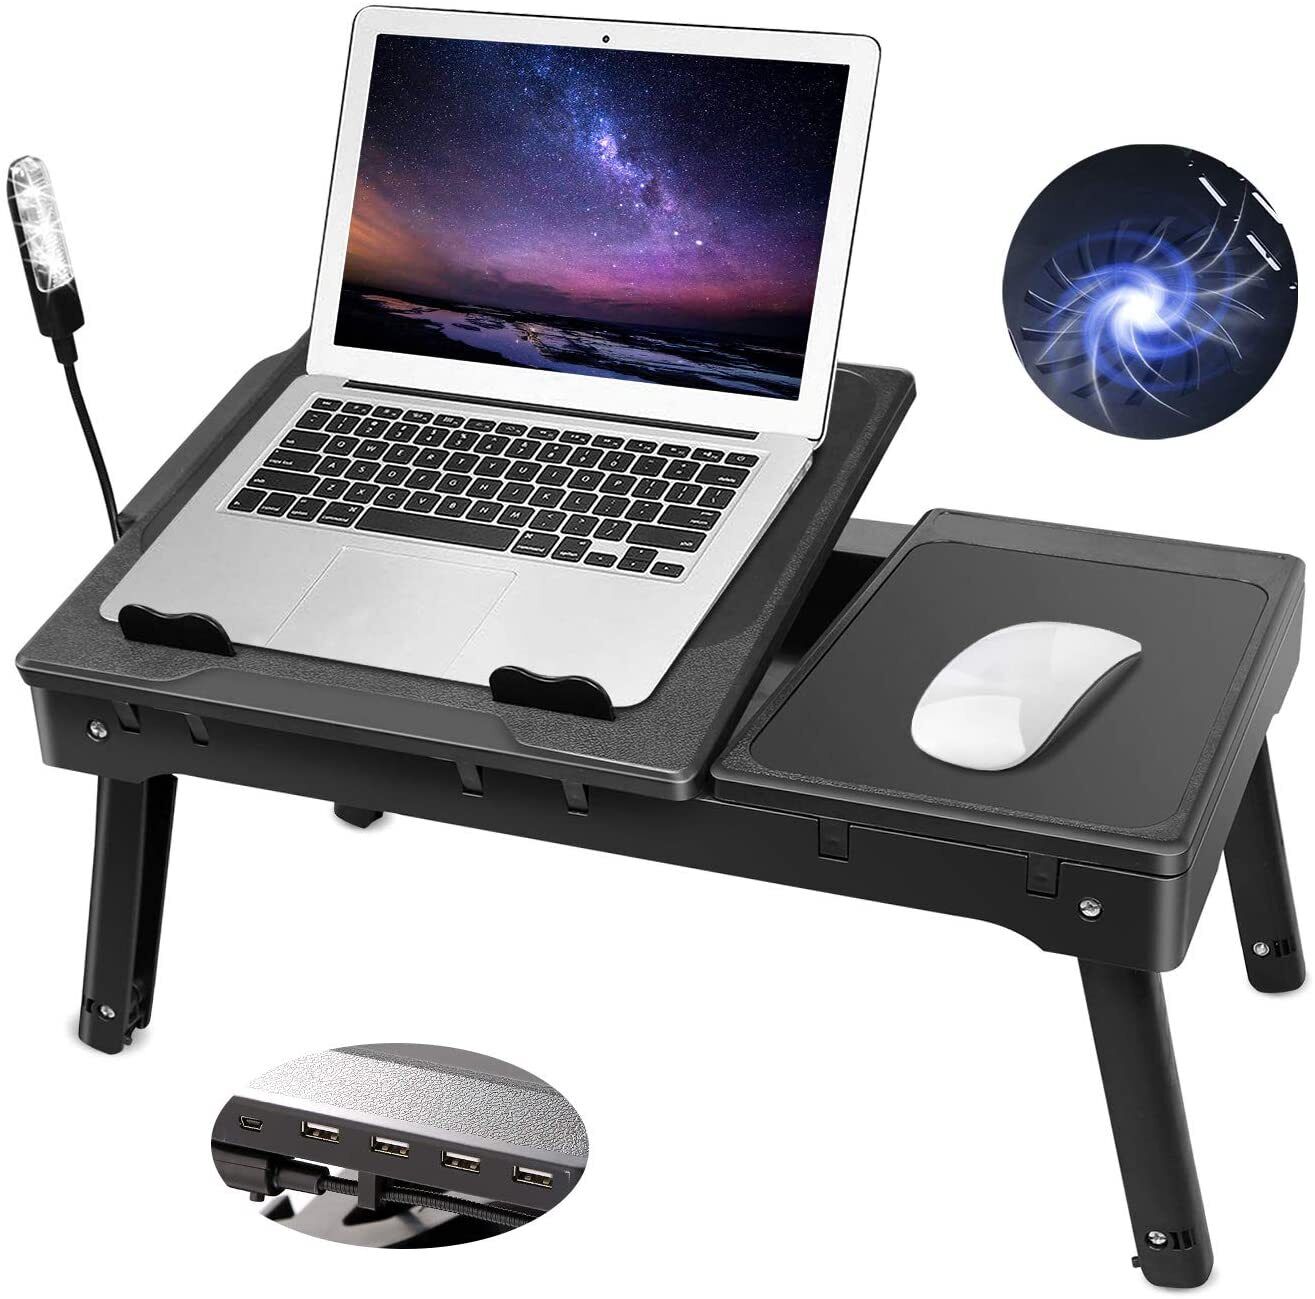 Foldable Laptop Table Tray Desk Tablet Desk Stand Bed Sofa Couch W/Cooling Fan